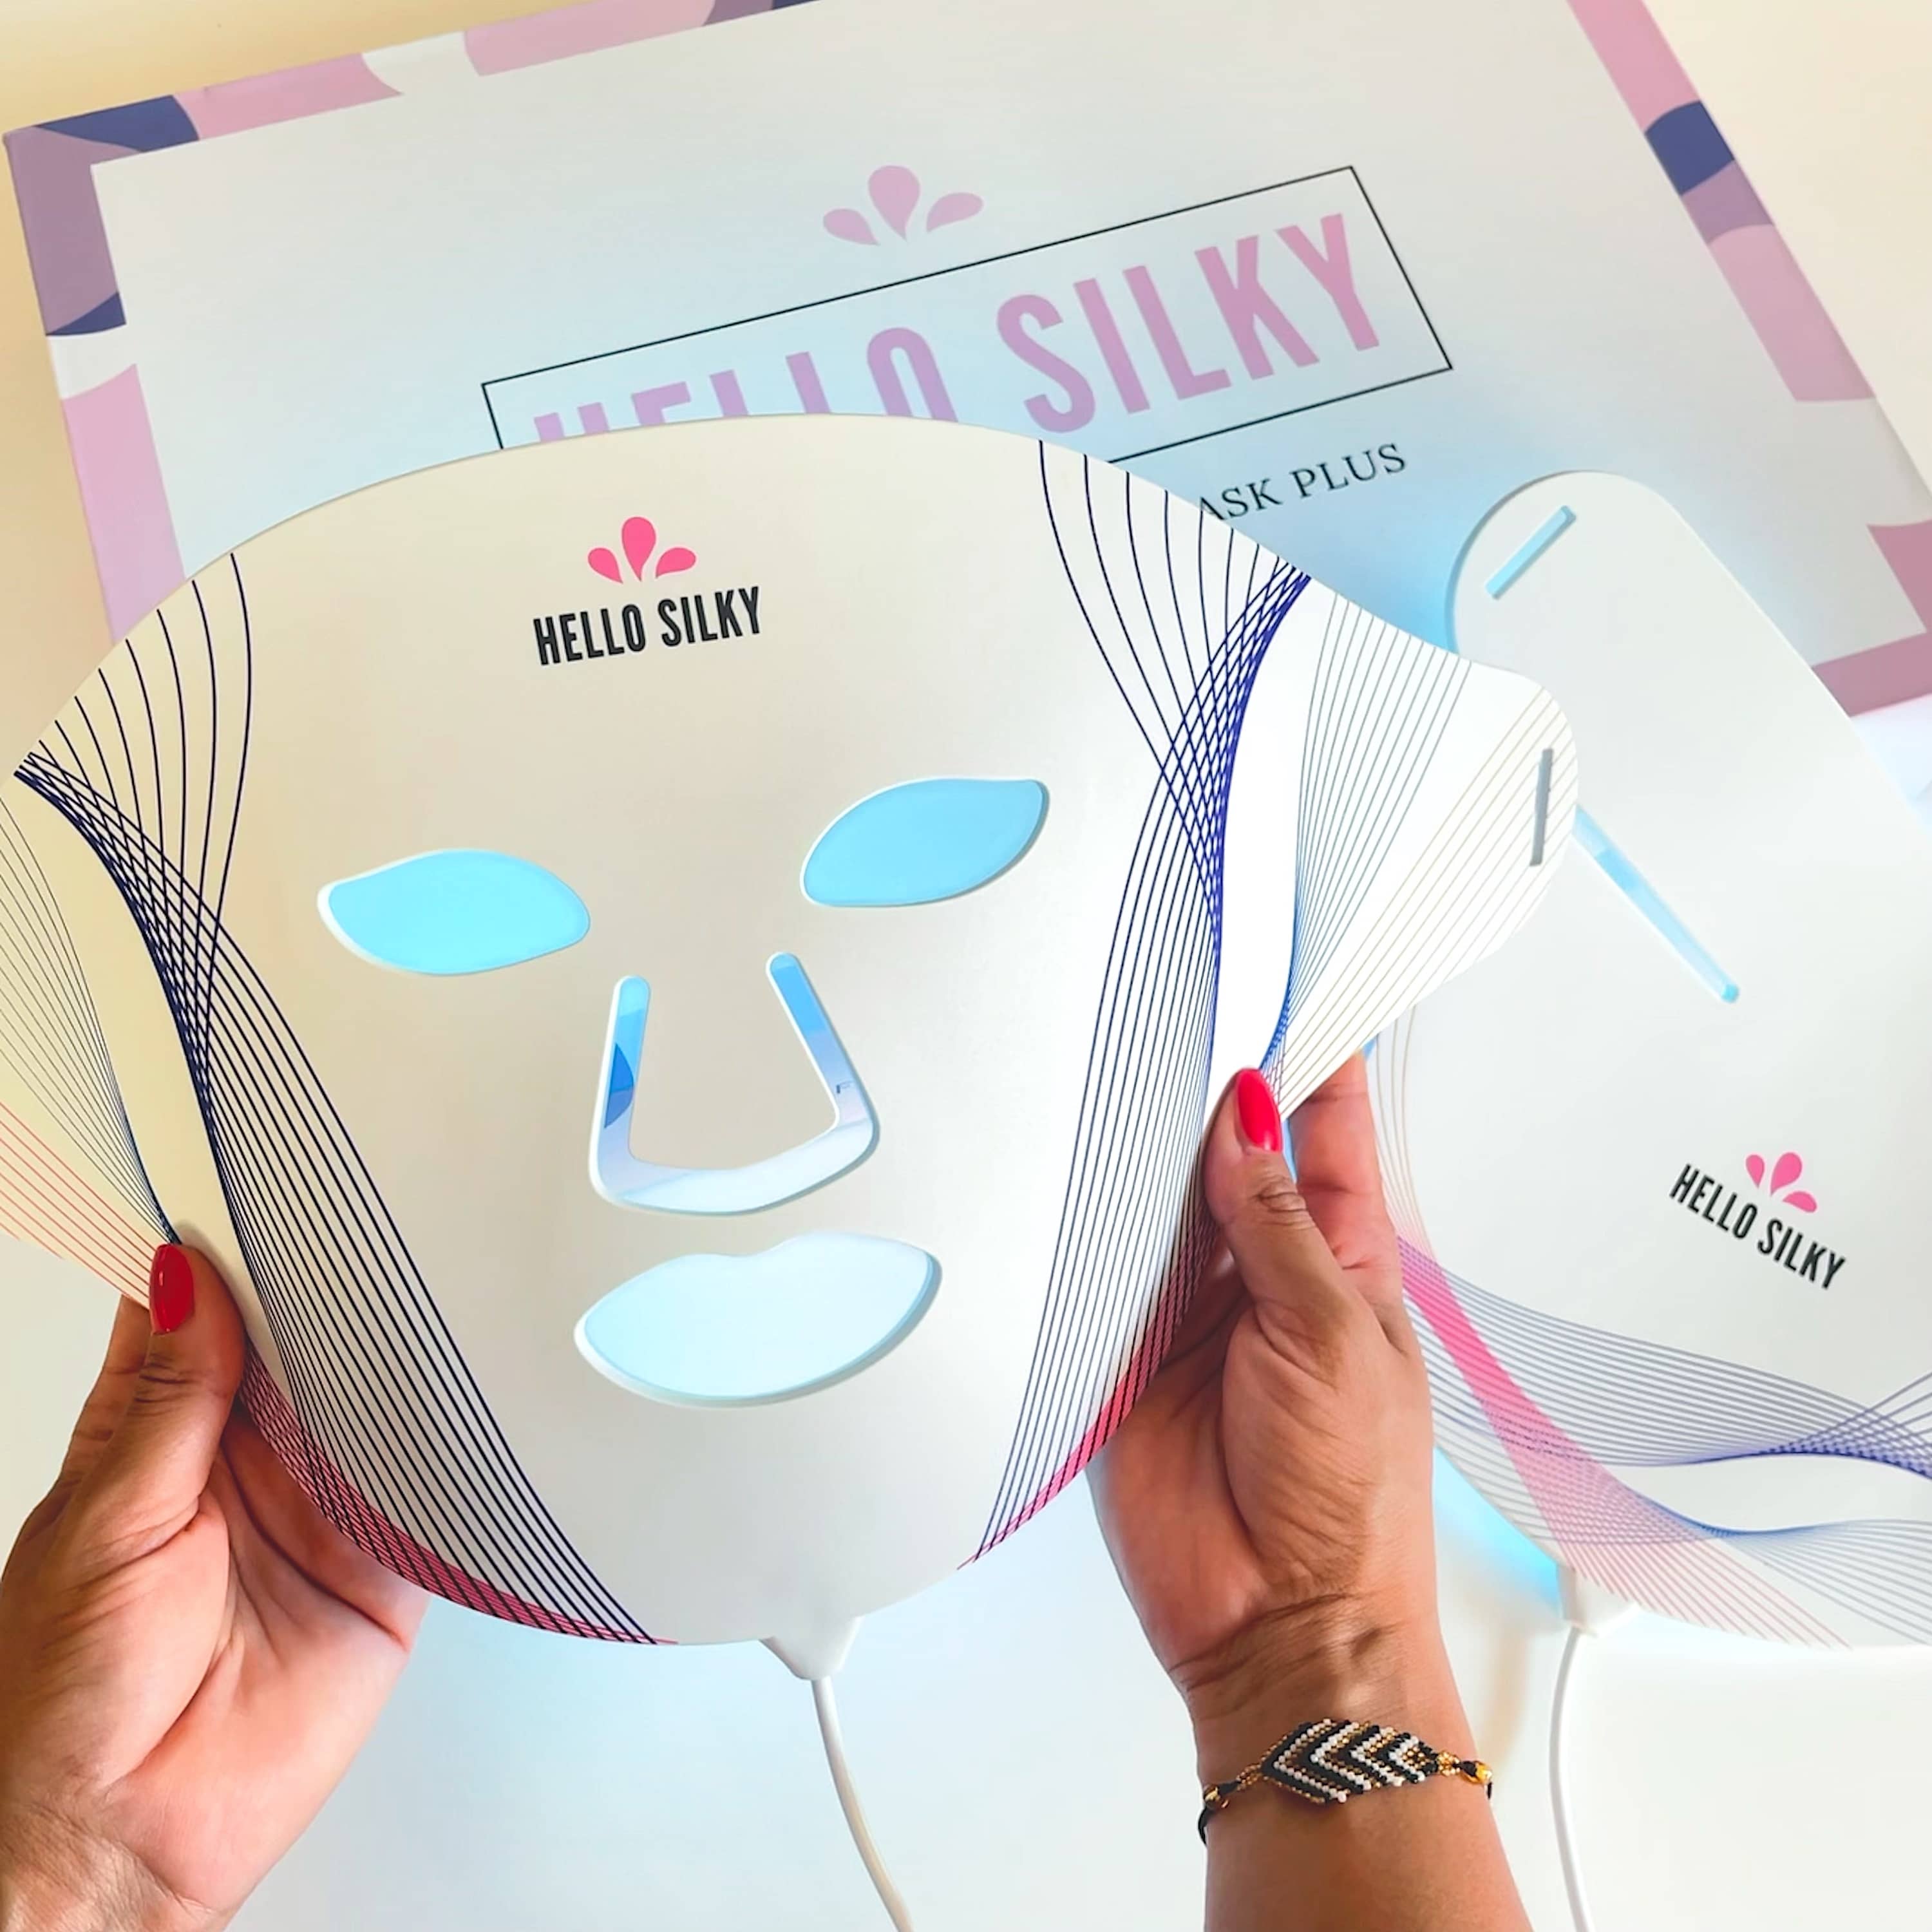 led face therapy mask